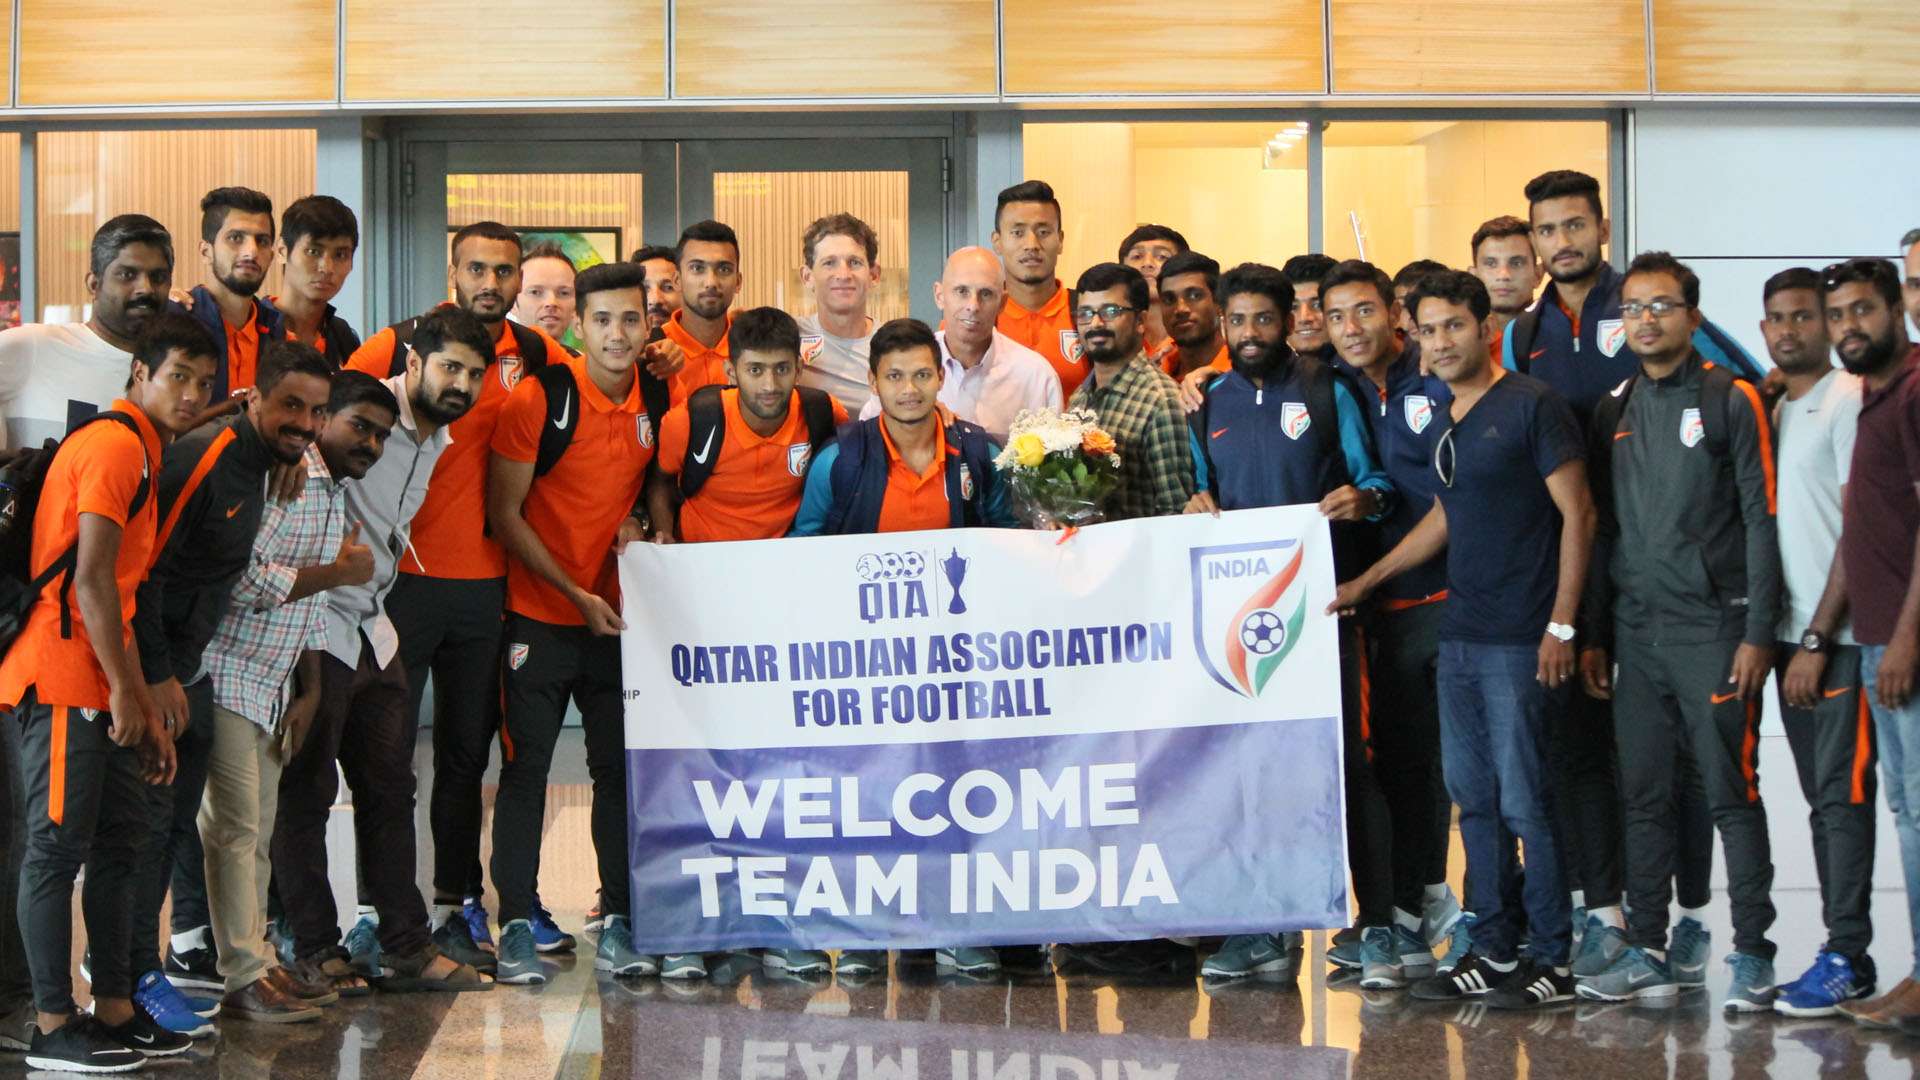 Indian U23 contingent's welcome in Qatar